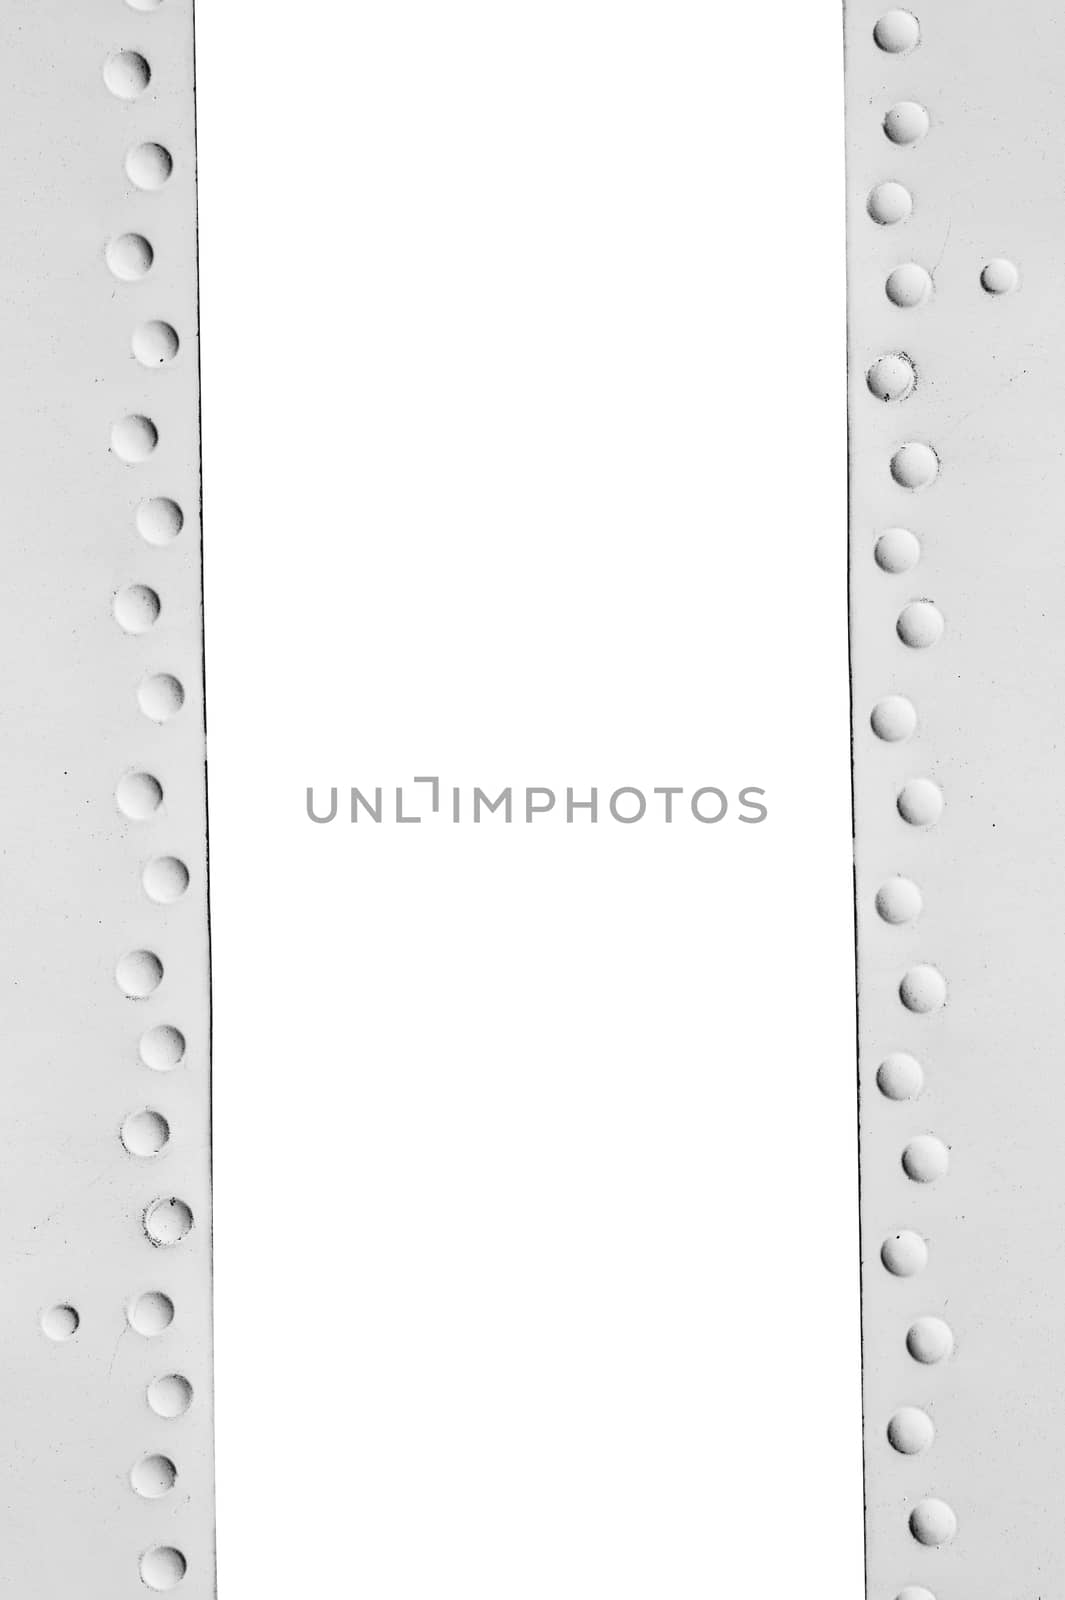 metal frame with rivets and space for text.